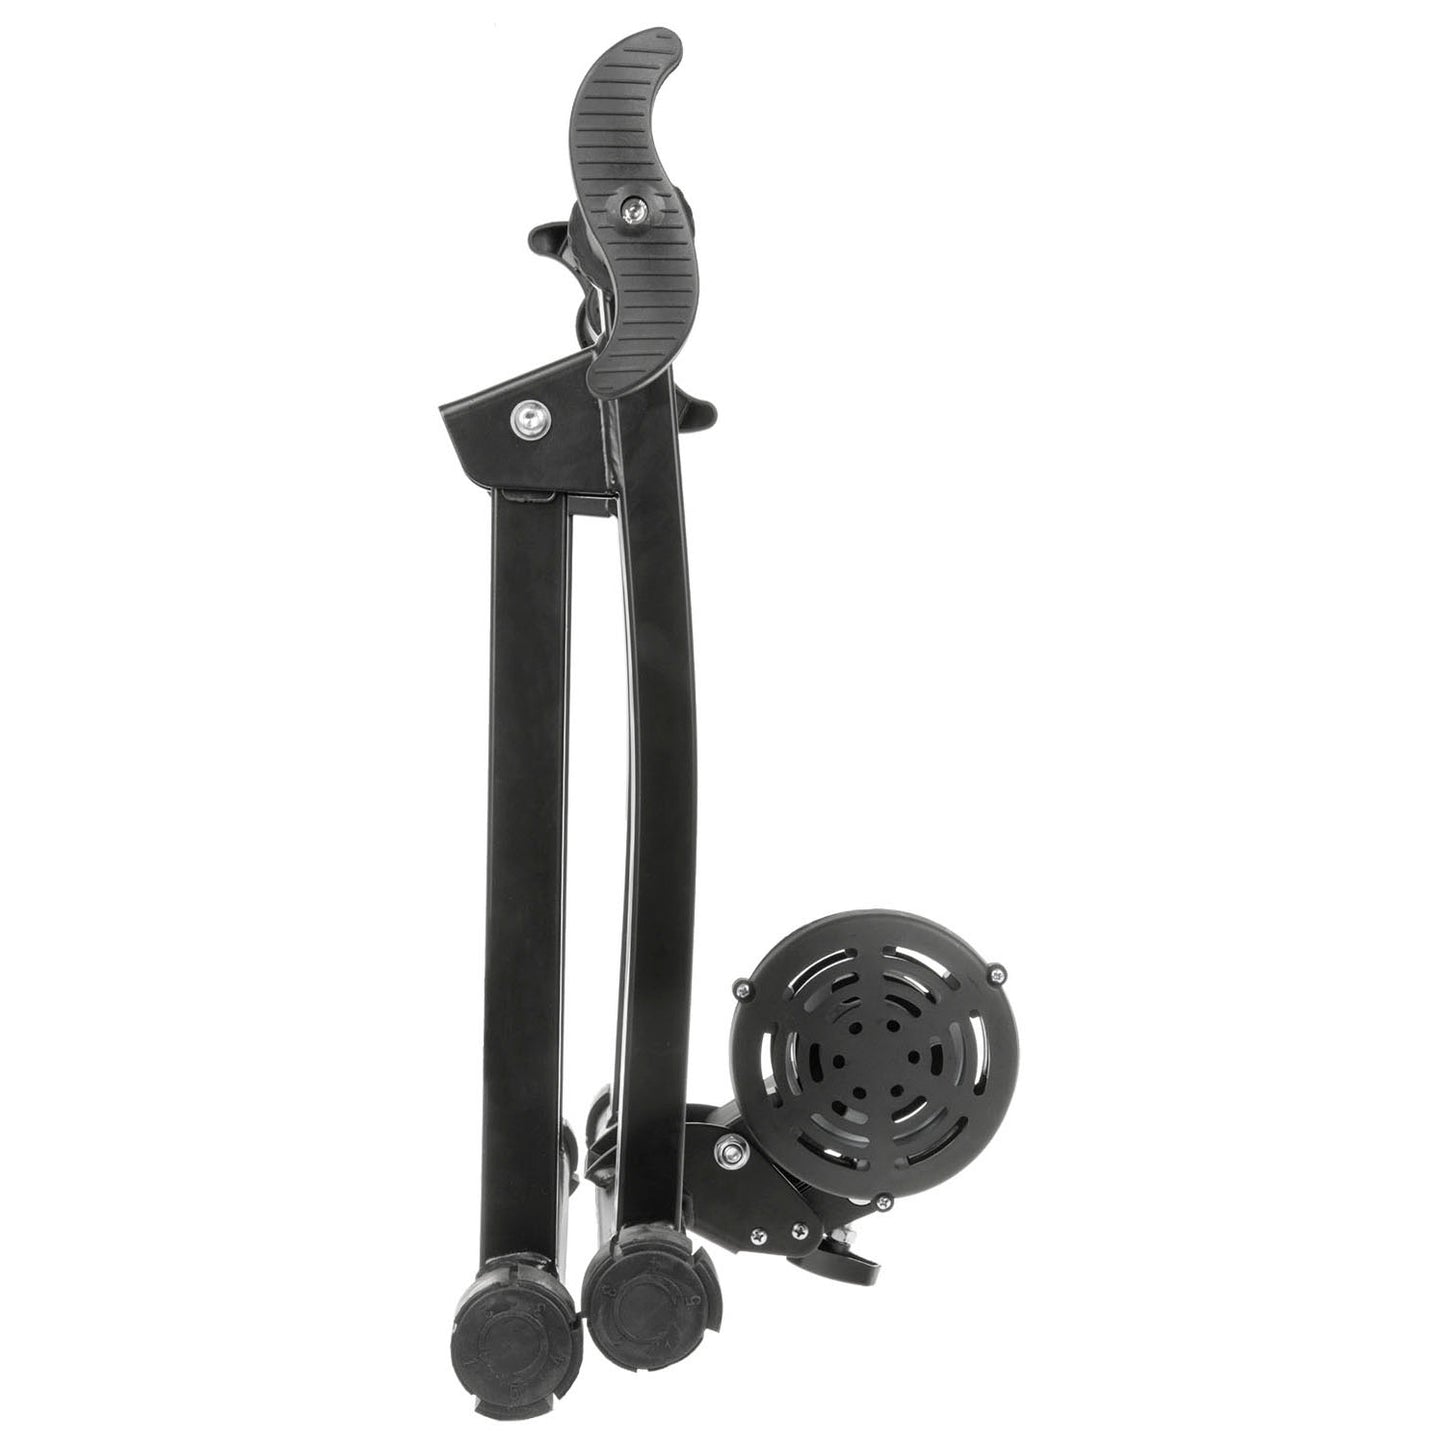 M-WAVE Yoke 'N 'Roll 60 roll exercise trainer